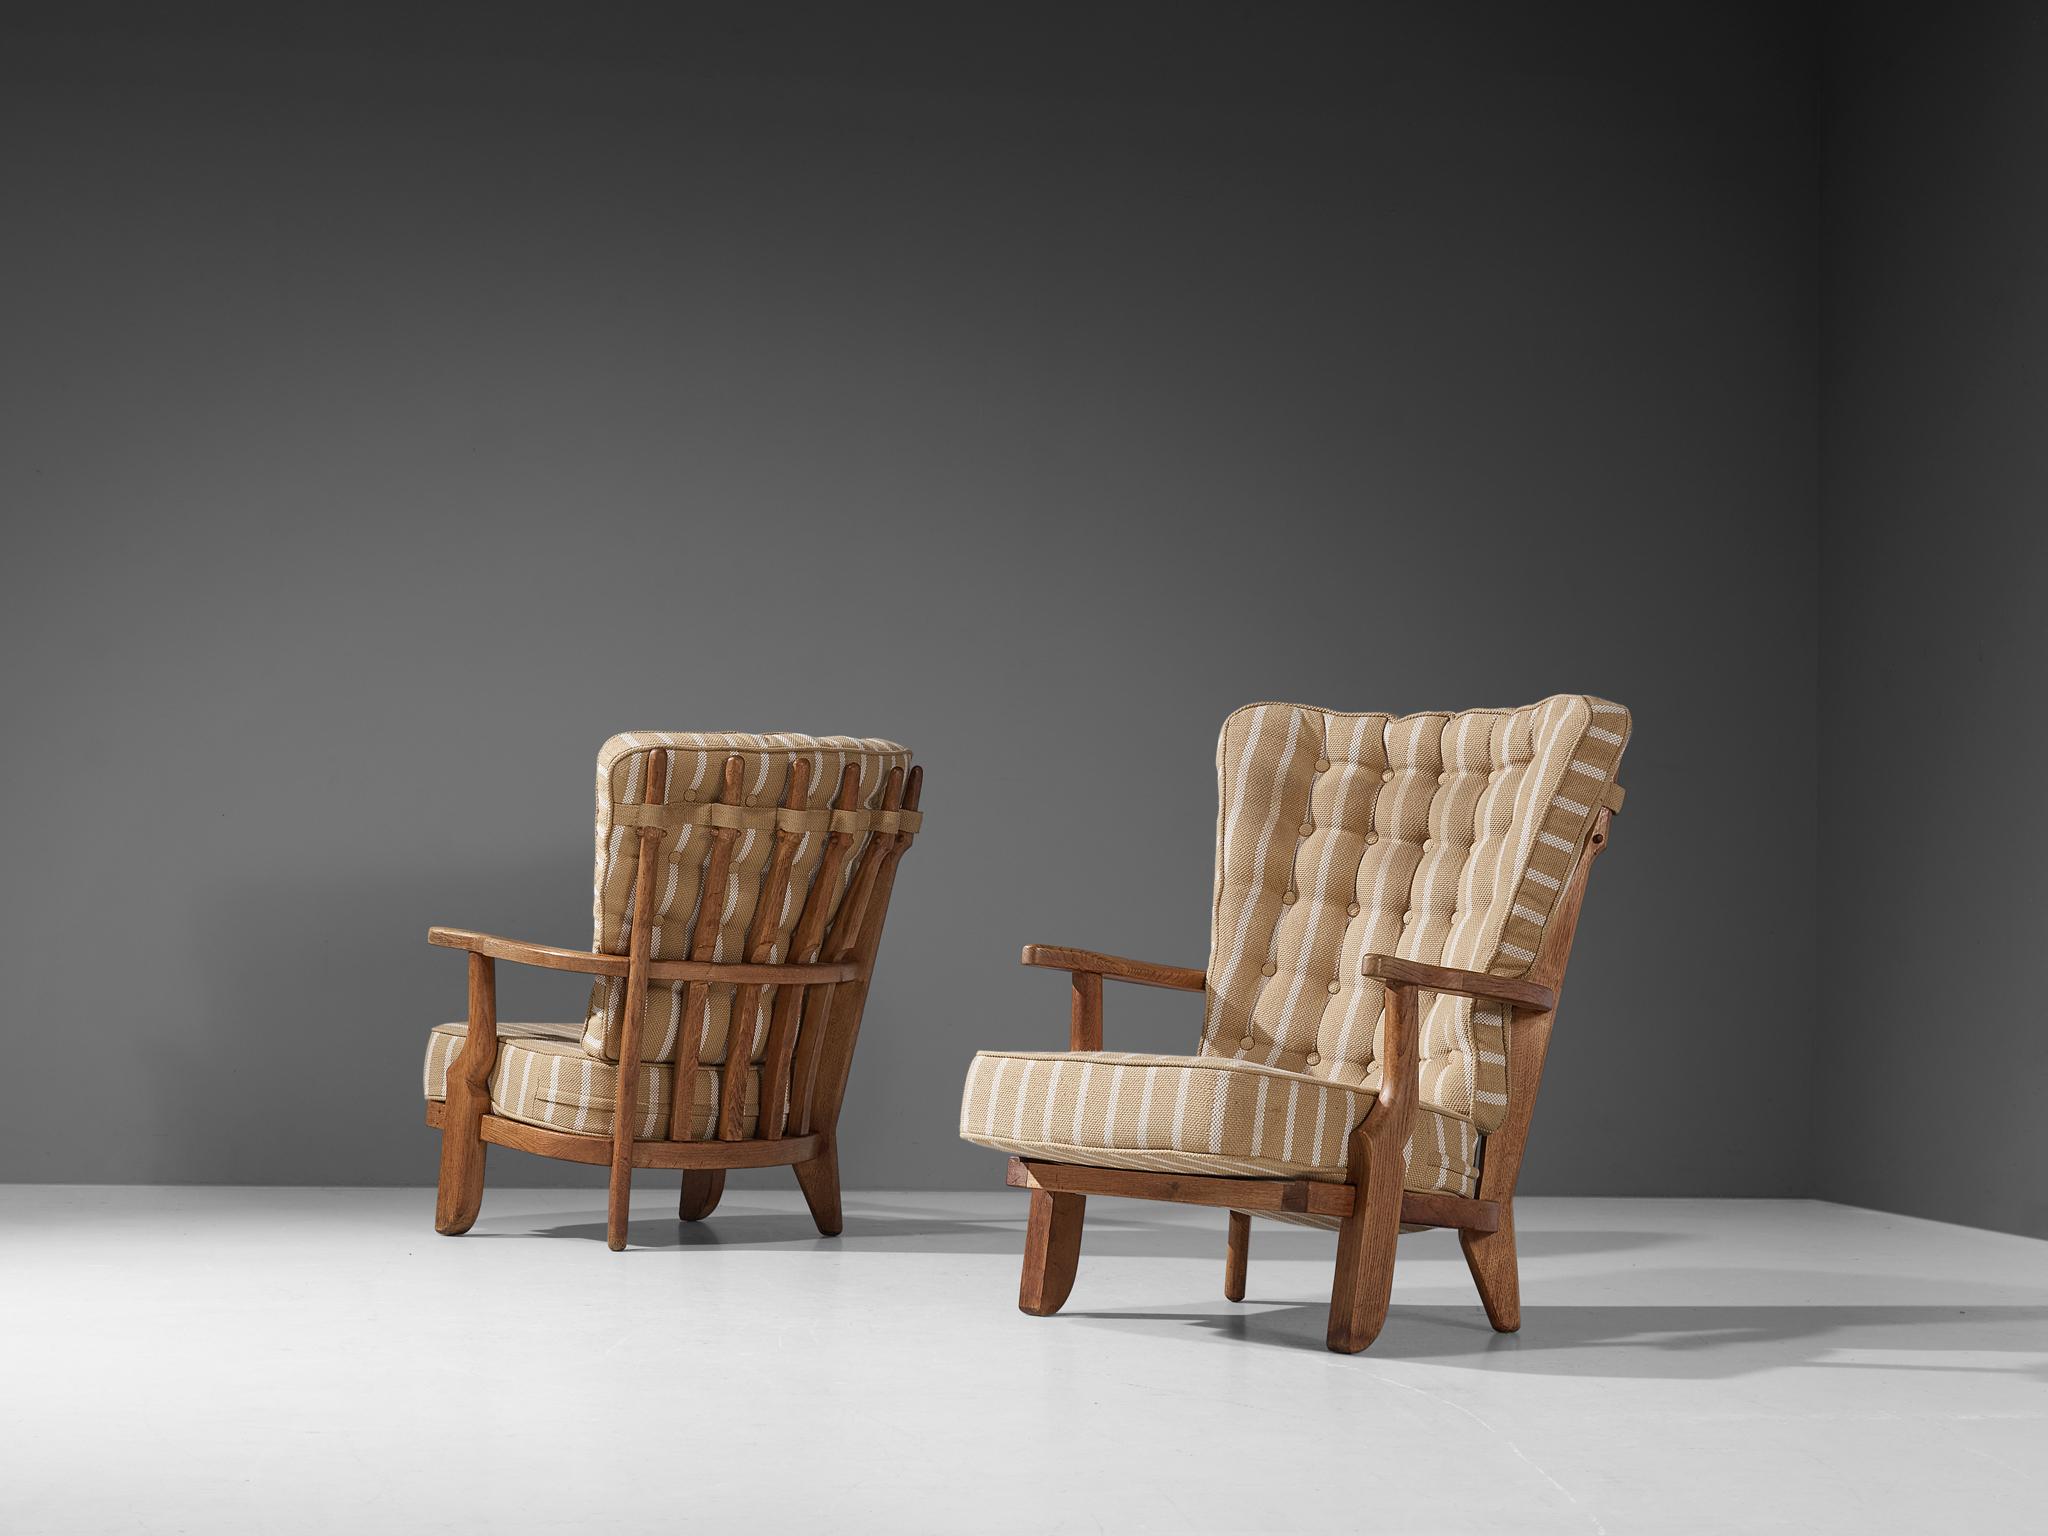 Guillerme et Chambron, lounge chairs, oak and striped fabric upholstery, France, 1960s.

Well sculpted Guillerme and Chambron 'Mid Repos' lounge chairs in solid oak with the typical characteristic decorative details at the back and capricious